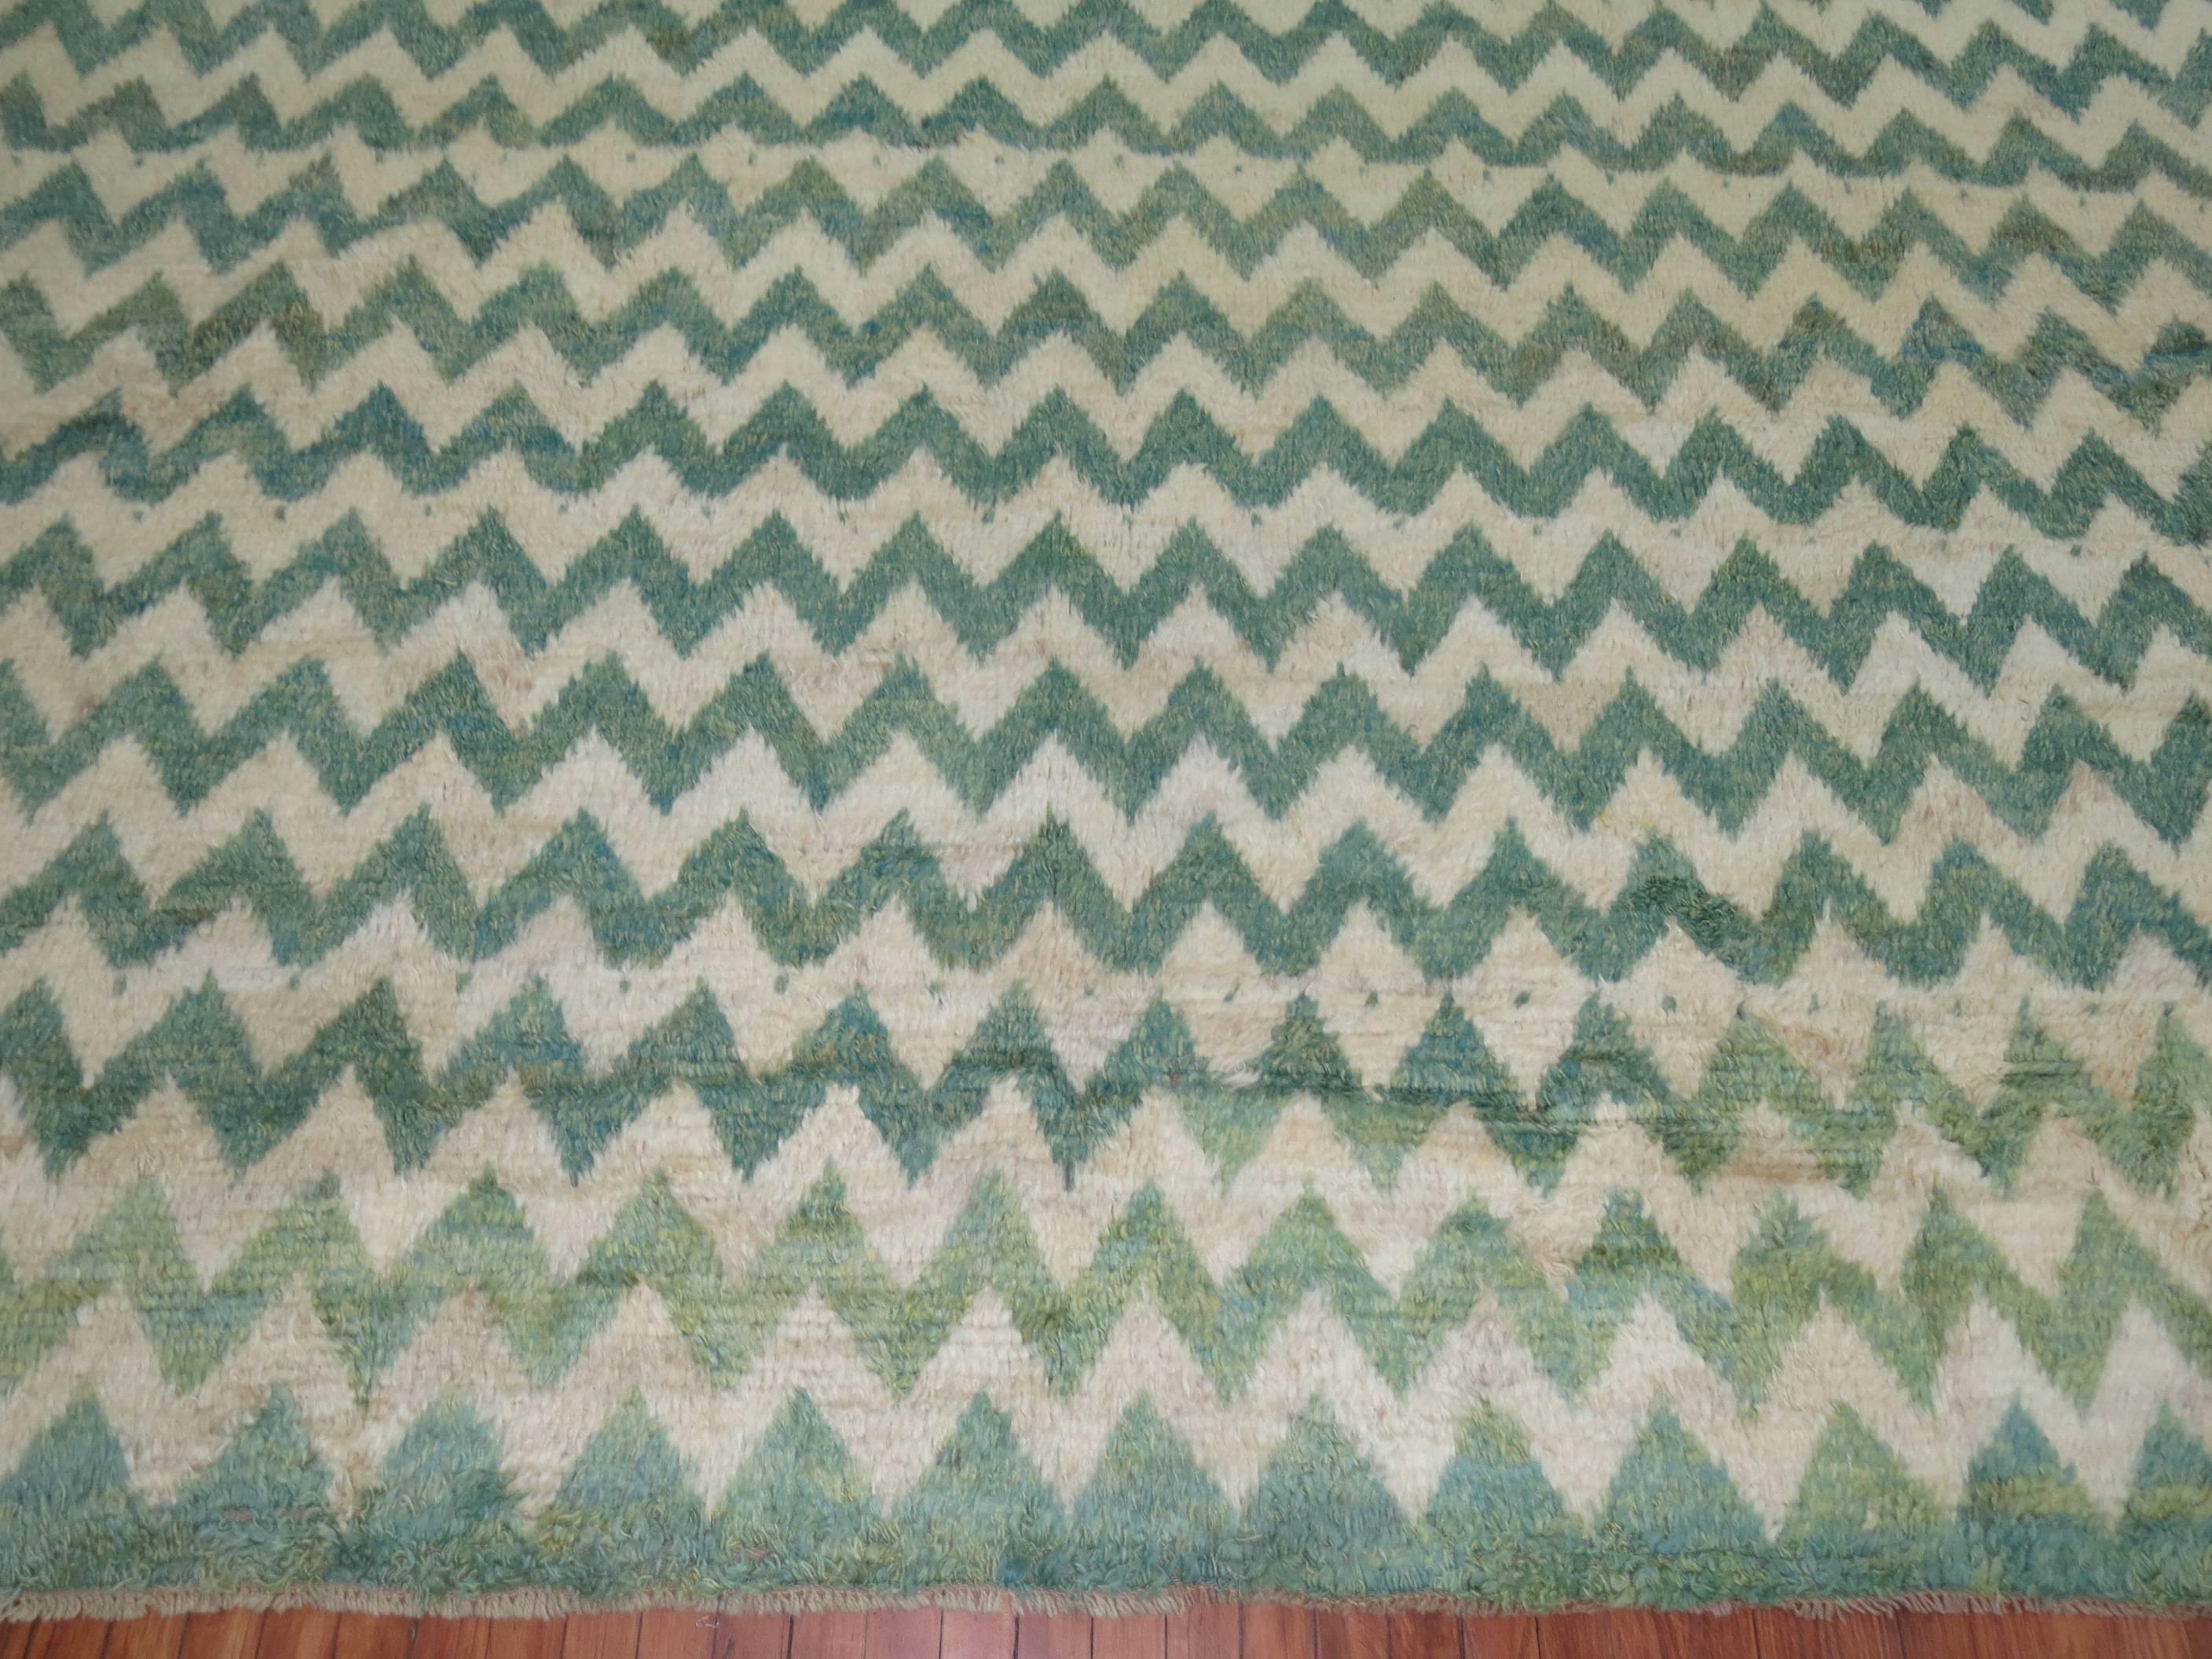 Modern Persian square rug with an all-over chevron motif in greens and ivory. Made with recycled wool derived from 20th century Turkish rugs.
Measures: 12'2